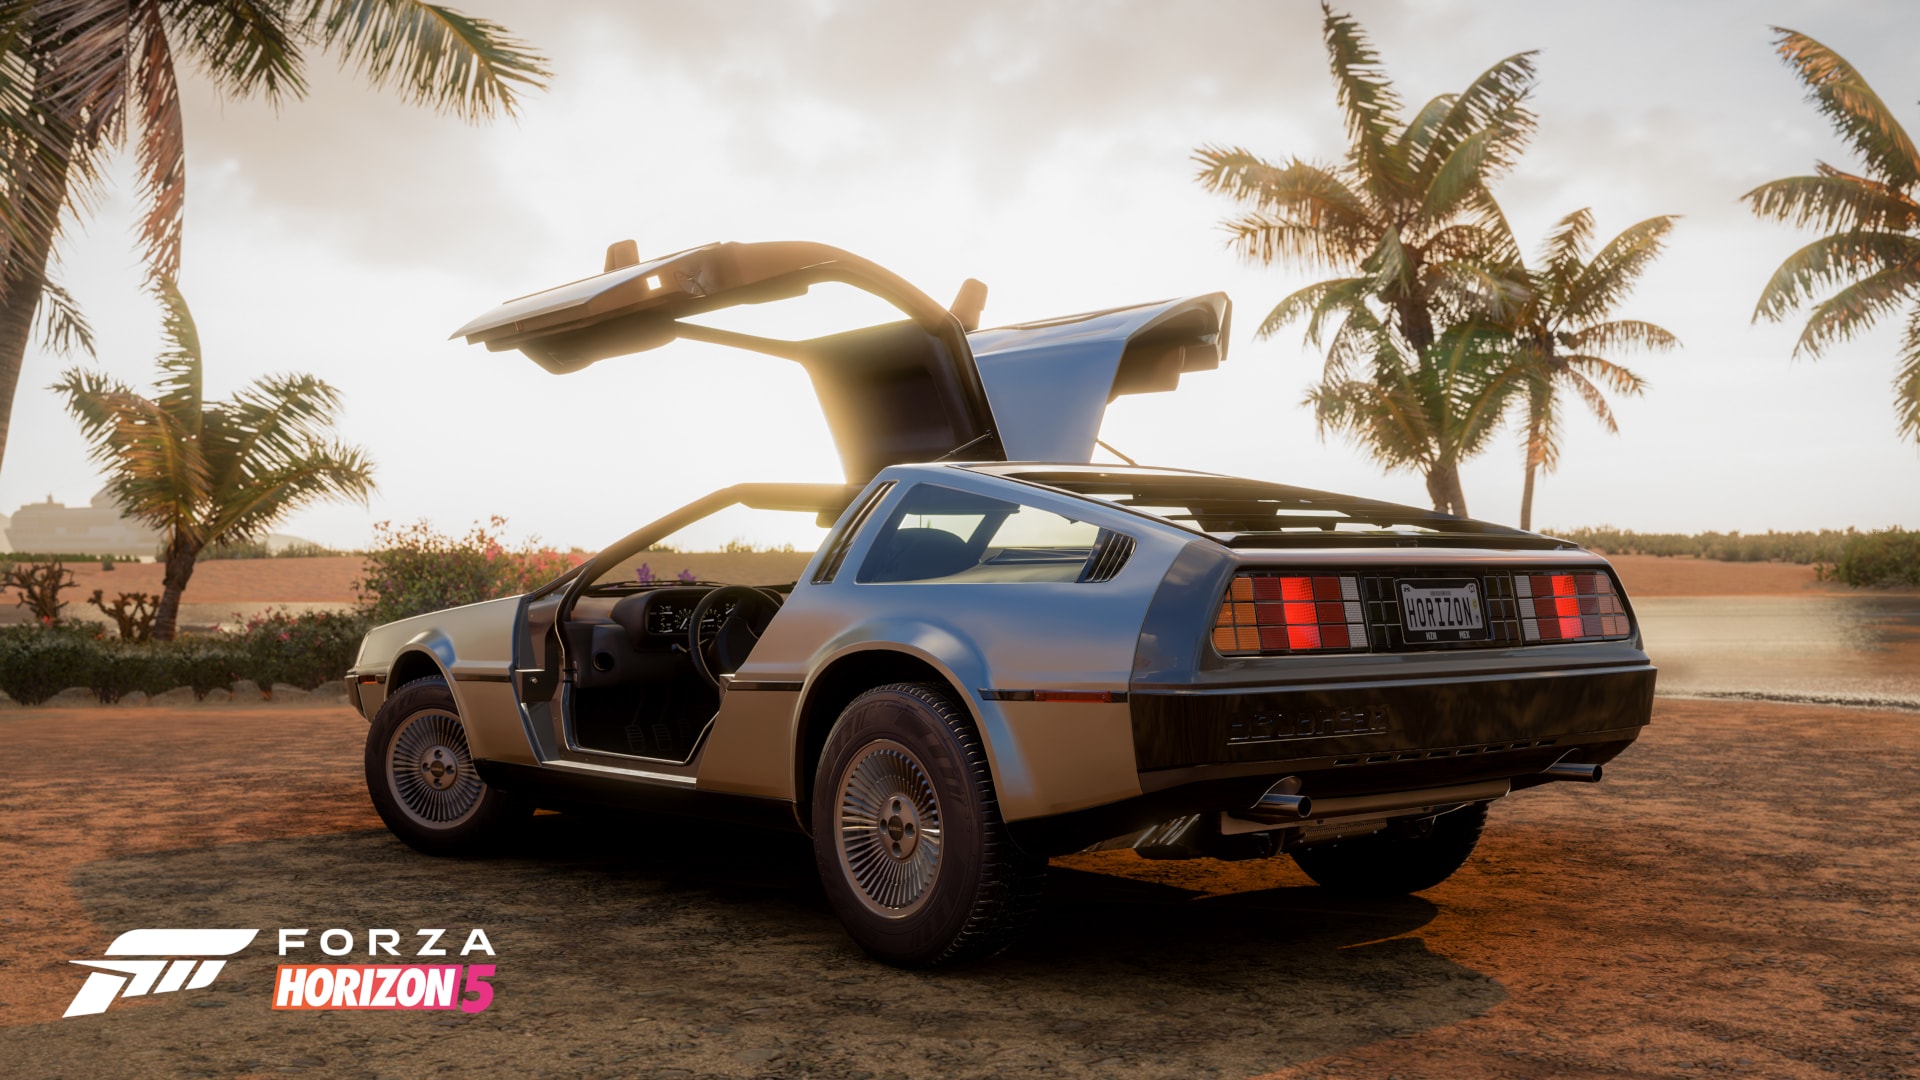 Forza Horizon 5 Series 1 Update Goes Live, Take a Look at the Cars You